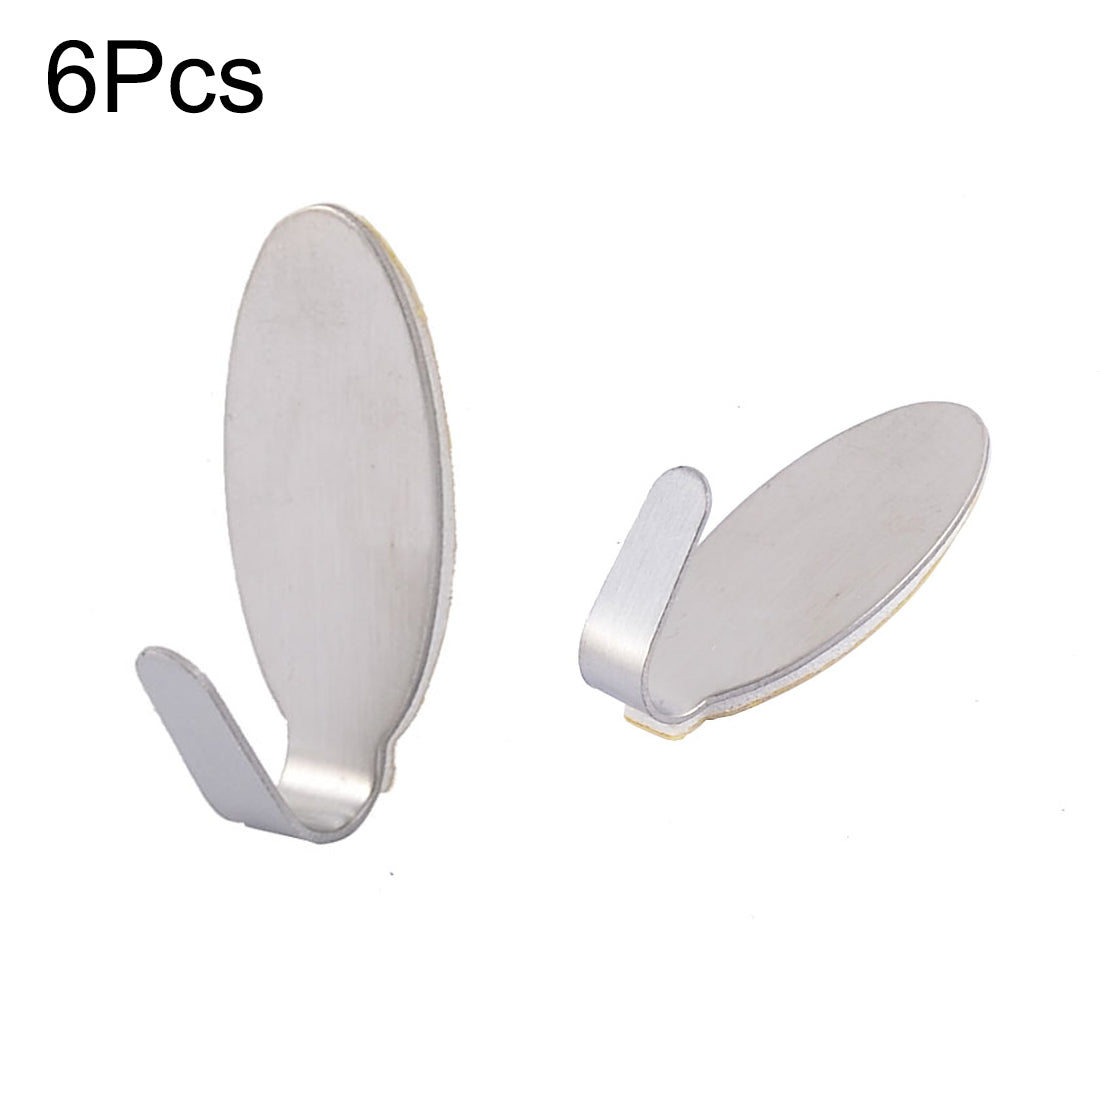 uxcell Uxcell Home Bathroom Bedroom Kitchen Stainless Steel Oval Shaped Self Adhesive Wall Hooks Hanger 6pcs